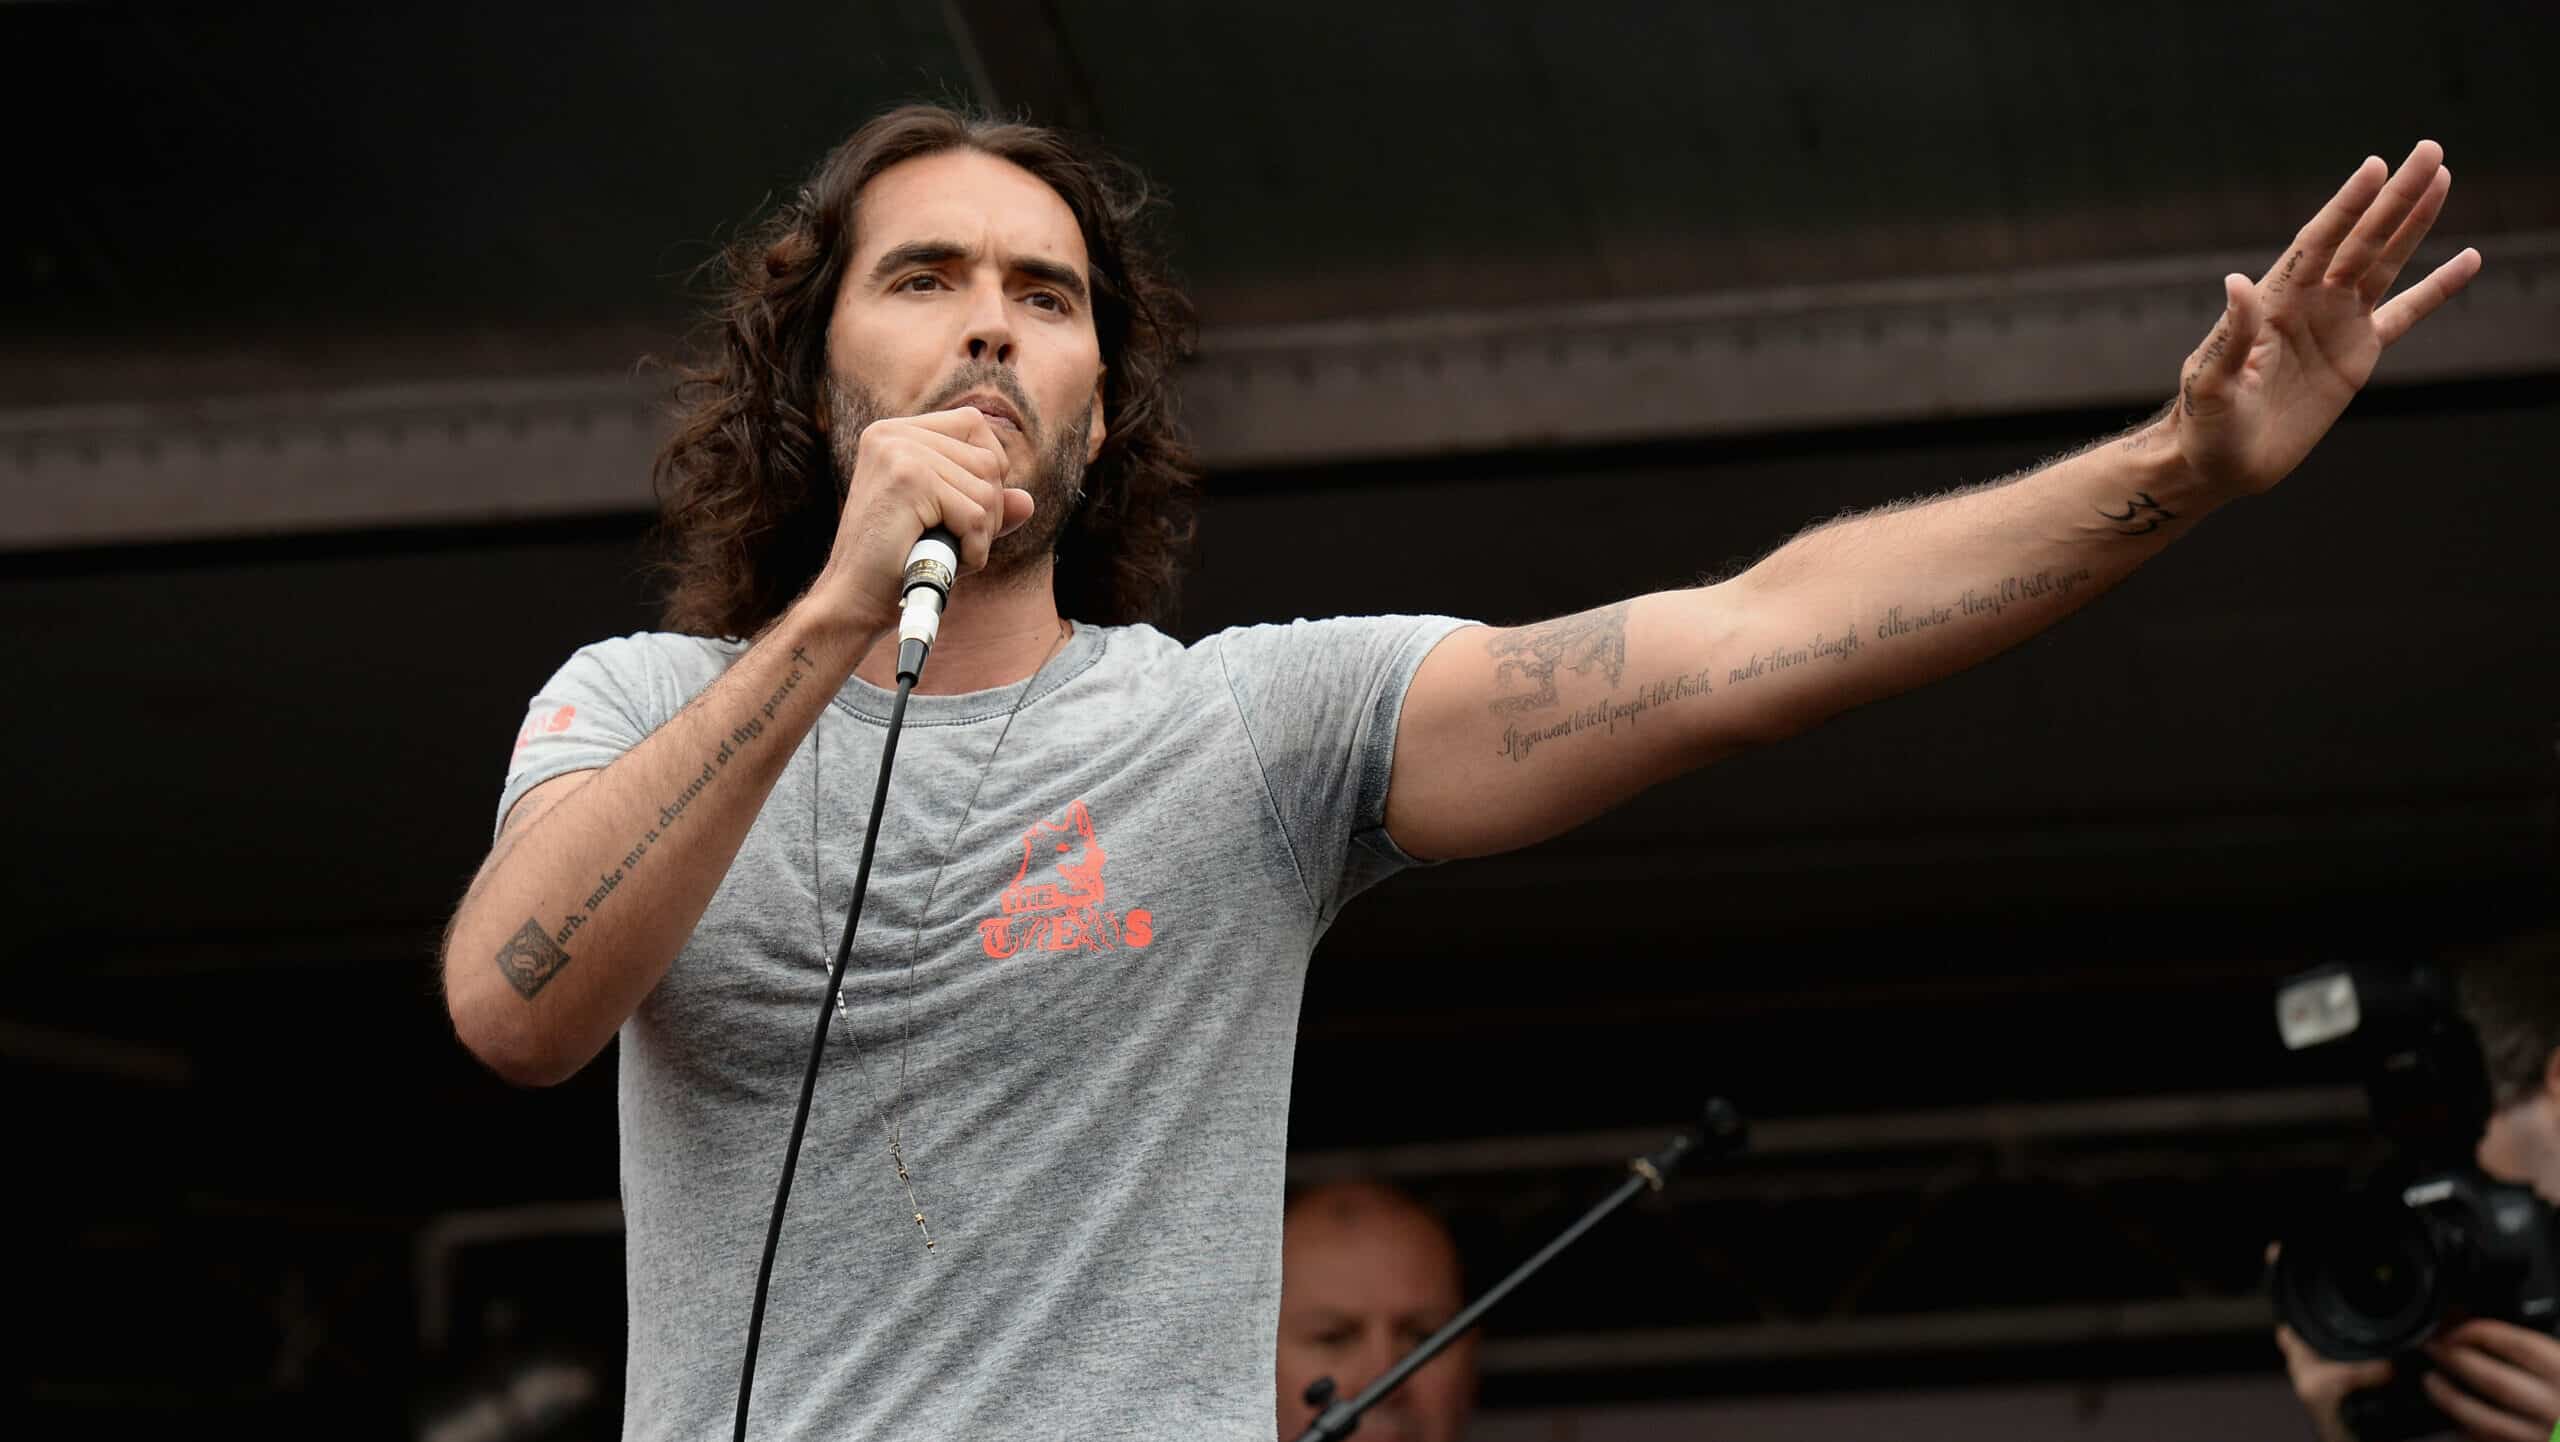 Comedian Russell Brand speaks to thousands of demonstrators gathered in Parliament Square to protest against austerity and spending cuts on June 20, 2015 in London, England. Thousands of people gathered to march from the City of London to Westminster, where they listened to addresses from singer Charlotte Church and comedian Russell Brand as well as Len McCluskey, general secretary of Unite and Sinn Fein's Martin McGuinness.